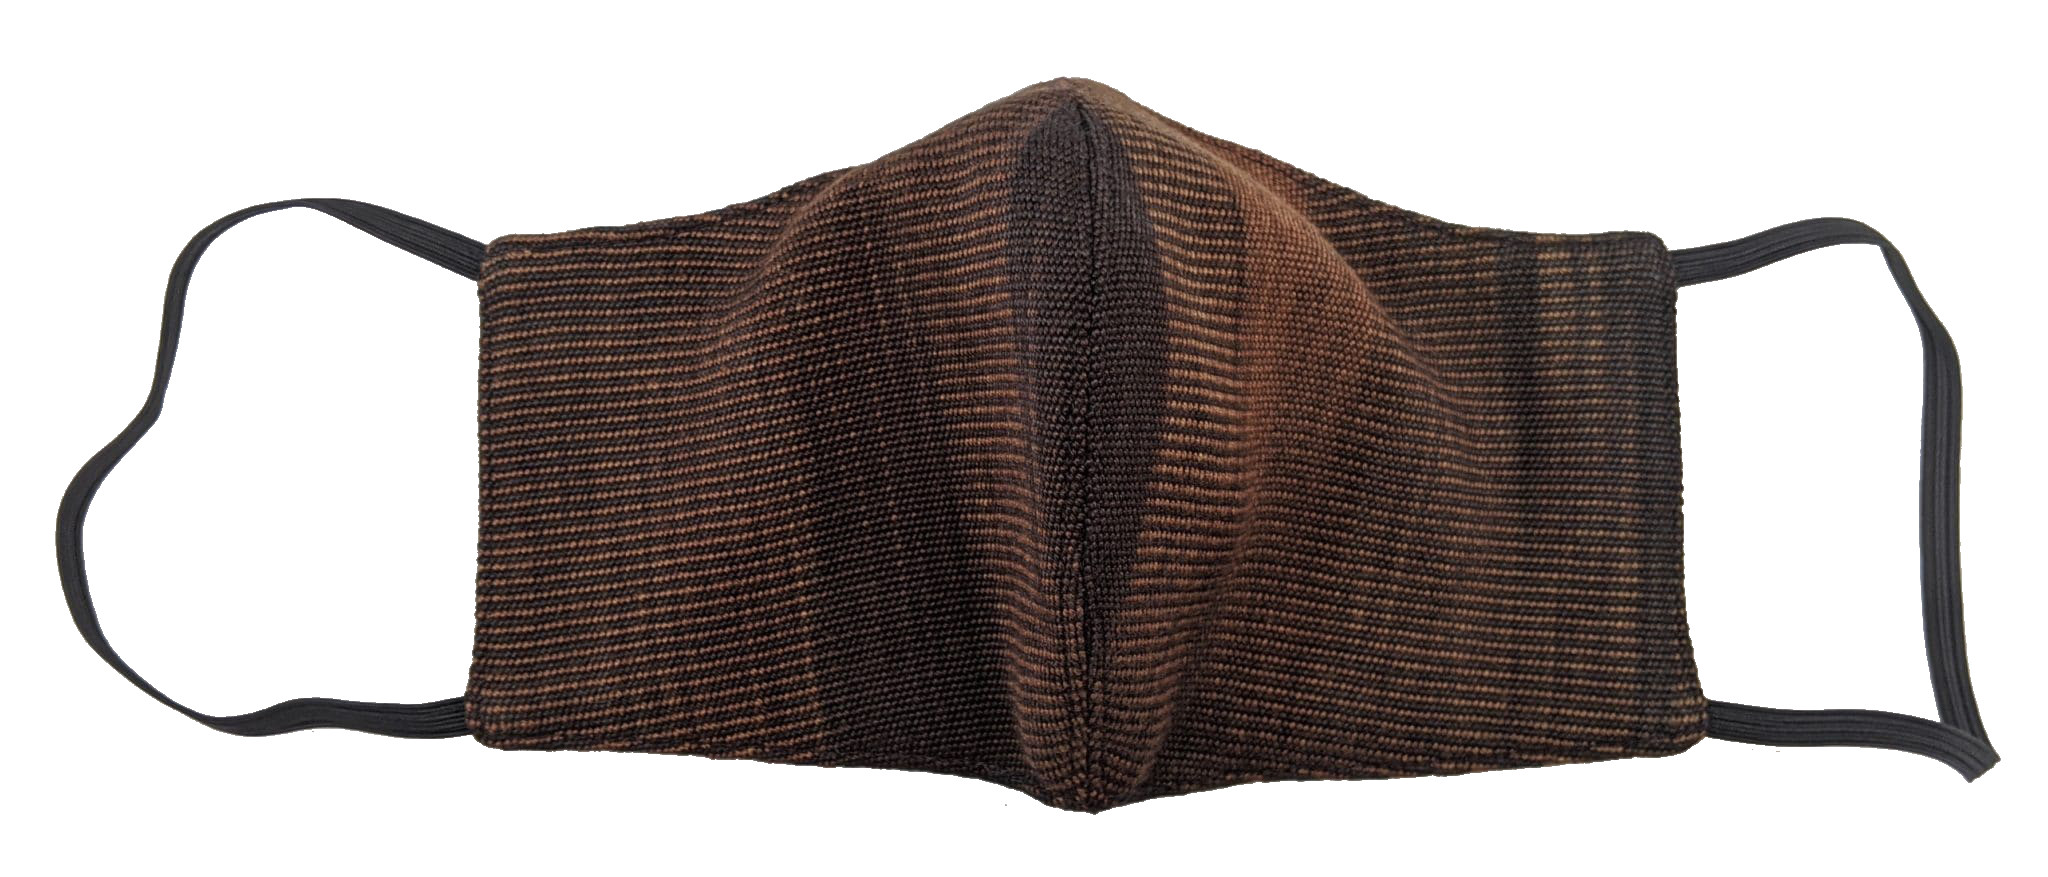 Handwoven Lightweight Bamboo Face Mask with Elastic Behind Ears - Browns and Black